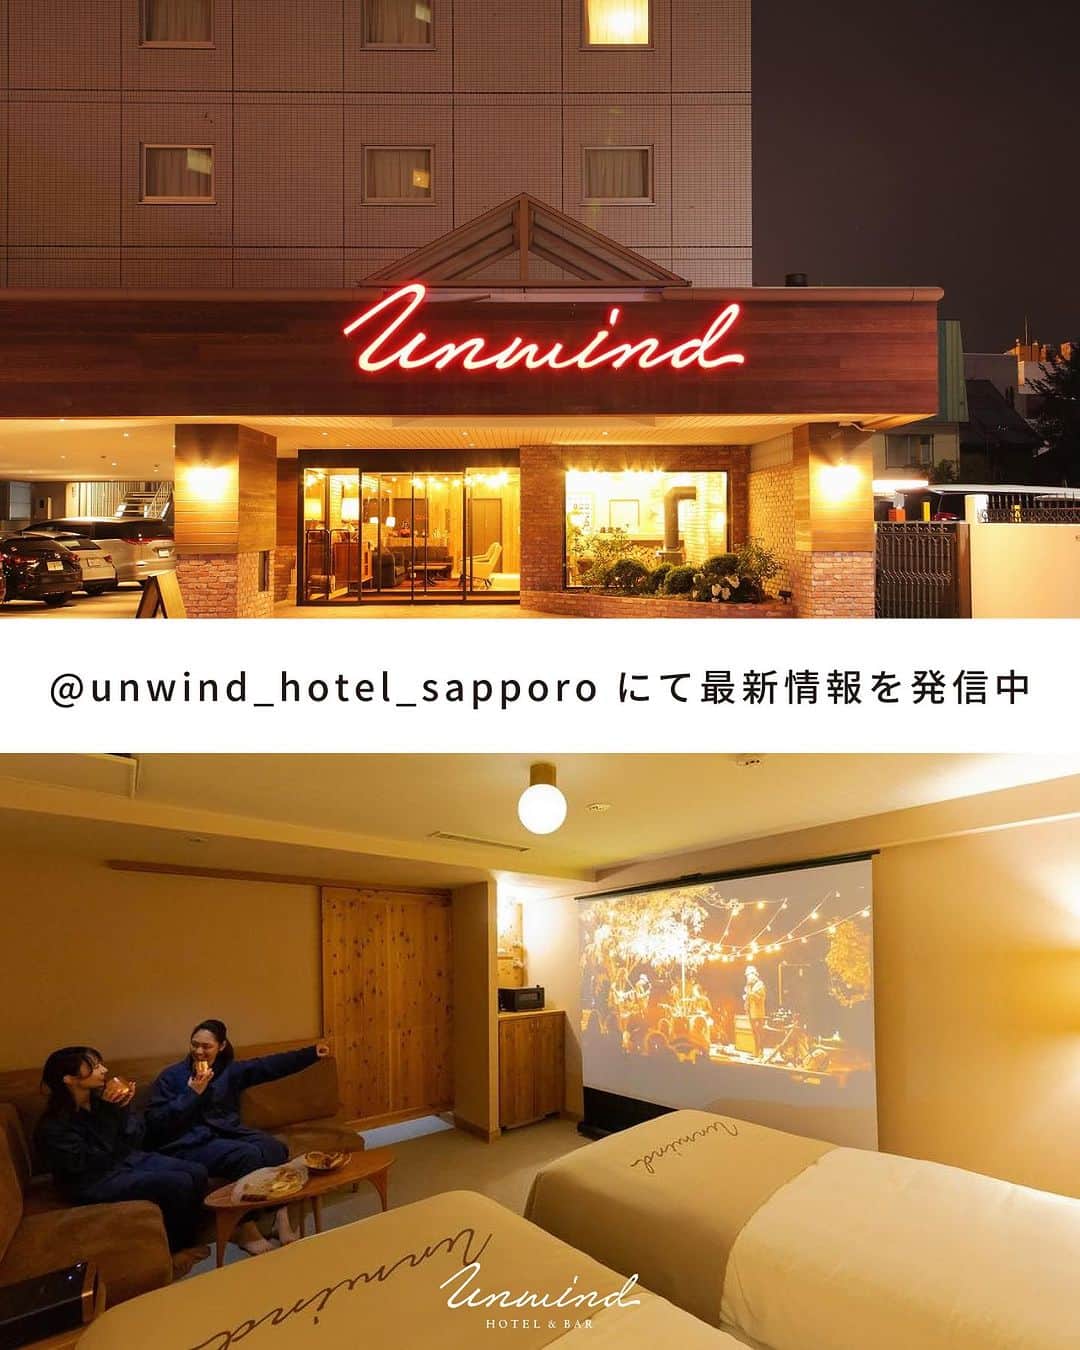 UNWIND HOTEL&BAR THE LODGE-LIKE HOTELさんのインスタグラム写真 - (UNWIND HOTEL&BAR THE LODGE-LIKE HOTELInstagram)「🏕️ロッジライクな世界観のホテル⁠ - 薪の暖炉、屋上テラスが人気⁠ - カゴ入りのお部屋にお届けの朝食⁠ - キャンプや山小屋のような世界観⁠ ⁠ 自宅のようにくつろげて、⁠ 非日常を味わえる世界観のホテル⁠です。⁠ ➤ @unwind_hotel_sapporo⁠ ⁠ ◆ #unwindhotelandbarsapporo⁠ The charm of a lodge and the comfort of home in one hotel.⁠One of the most appealing aspects of lodges and cottages⁠ is the peaceful distance they offer from the hustle and bustle of everyday life,while still providing the cozy comforts of home.⁠ ⁠ This UNWIND HOTEL&BAR has been tastefully designed to offer an exceptionally comfortable and relaxing atmosphere.⁠ ⁠ Its warm design and unique features create an ambiance that encourages guests to unwind and relax throughout the entire hotel, not just within the confines of their rooms.⁠ ⁠ ——————————————⁠ ⁠ #ライブリーホテルズ⁠ 【⁠ホテルは泊まる以上の体験を】全国に11施設あるライフスタイルホテル・ブランドです。⁠今までにない旅行やホテルの楽しみ方を提案しています。⁠ ➤ @explorelively⁠ ⁠ #livelyhotels⁠ Featuring 6 distinct brands across 11 hotels in Japan, LIVELY HOTELS is a collection of lifestyle hotels offering guests a place to relax and recharge after a long day with innovative design and cutting-edge technology.⁠ ⁠ ——————————————⁠ #explorelively #lifestylehotel ⁠ #designhotel #boutiquehotel ⁠#japantrips #japanhotel #tokyohotel ⁠#designerhotel #東京ホテル #都内ホテル #上野ホテル #根津ホテル #大阪ホテル #小樽ホテル #北海道ホテル #札幌ホテル #京都ホテル #福岡ホテル #沖縄ホテル #那覇ホテル #デザインホテル #おしゃれホテル #ブティックホテル #ホテル好き #ライフスタイルホテル ⁠」11月9日 19時21分 - unwind_hotel_sapporo